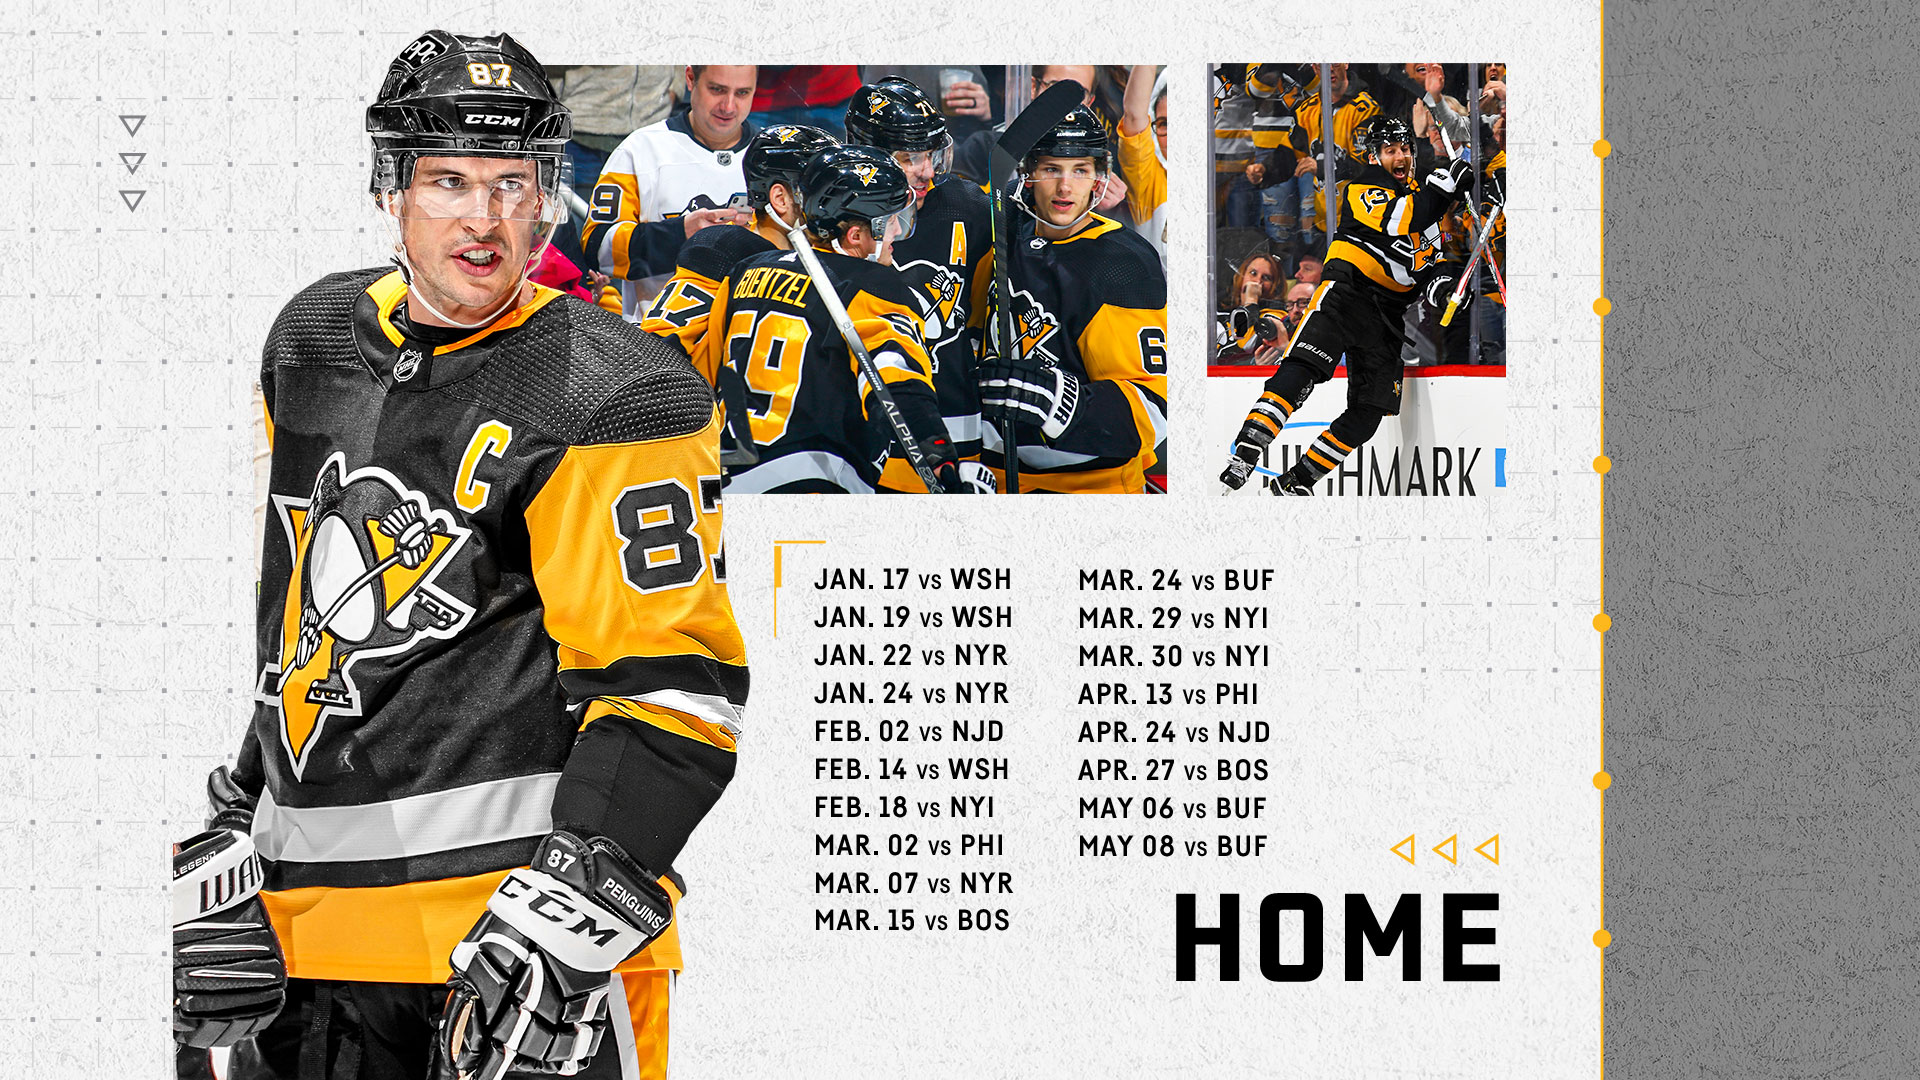 Pittsburgh Penguins on X: Heard you were asking about a jersey schedule 😏  Details:   / X